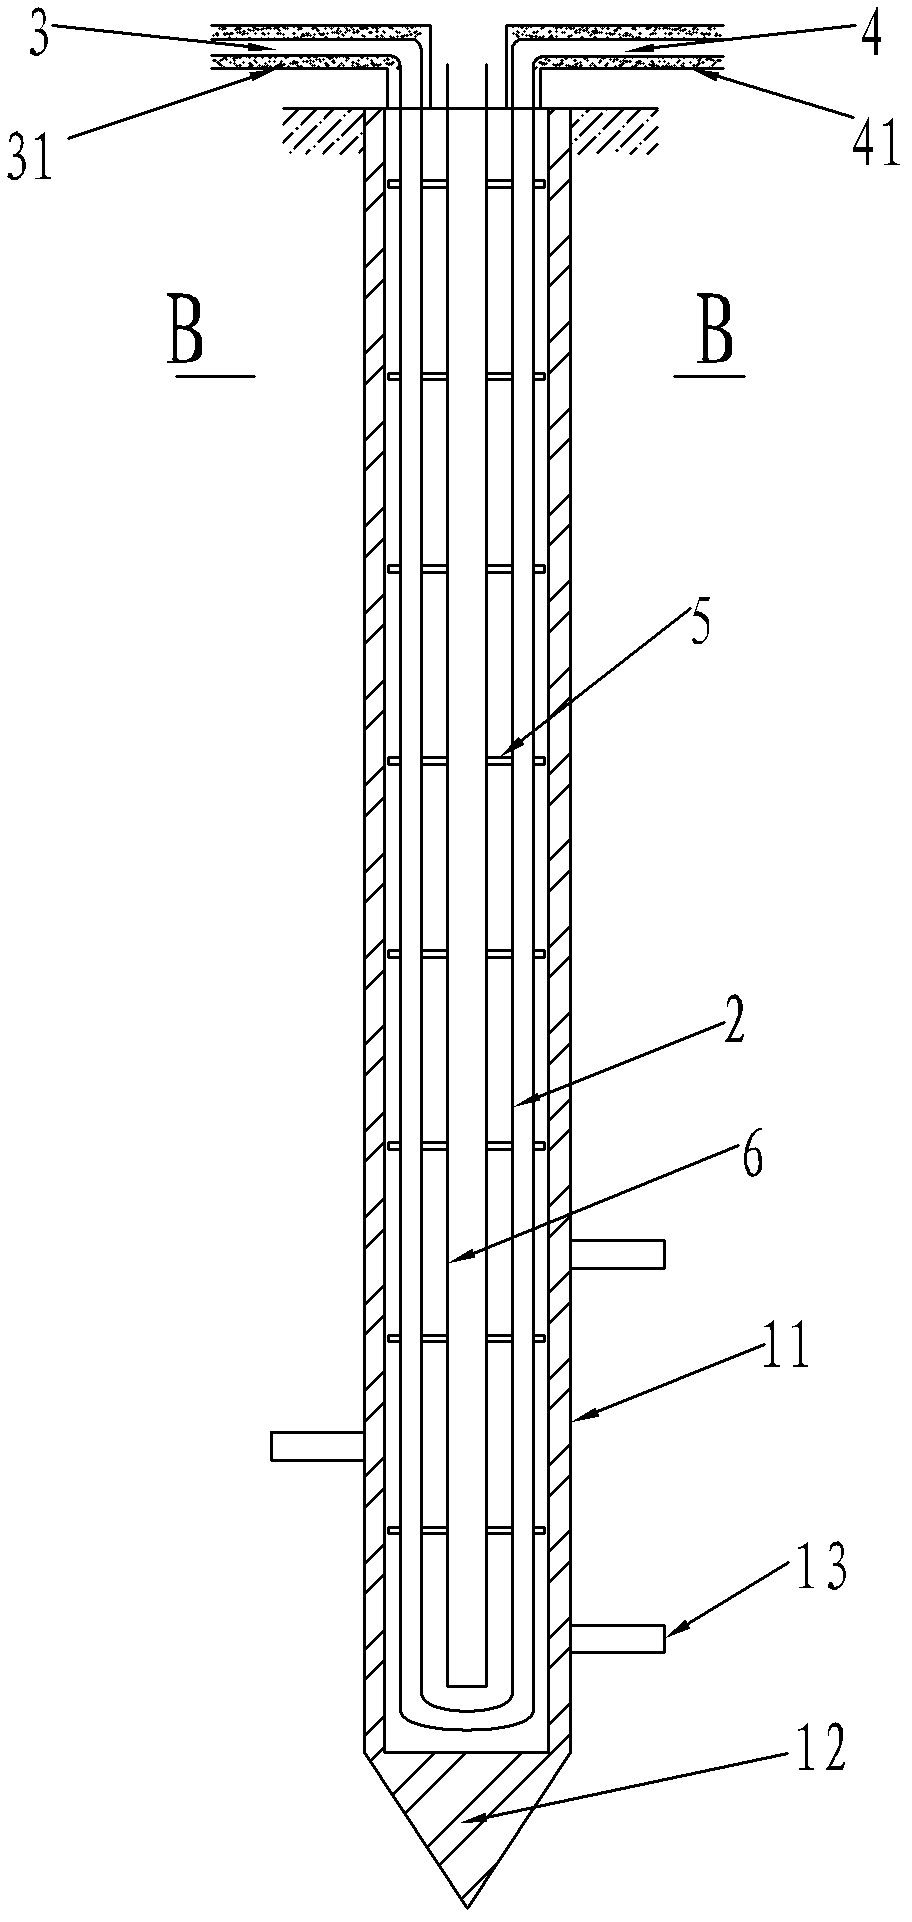 Precession-type backfill grouting ground source thermal energy conversion precast pile device and method for embedding precast pile device into stratum